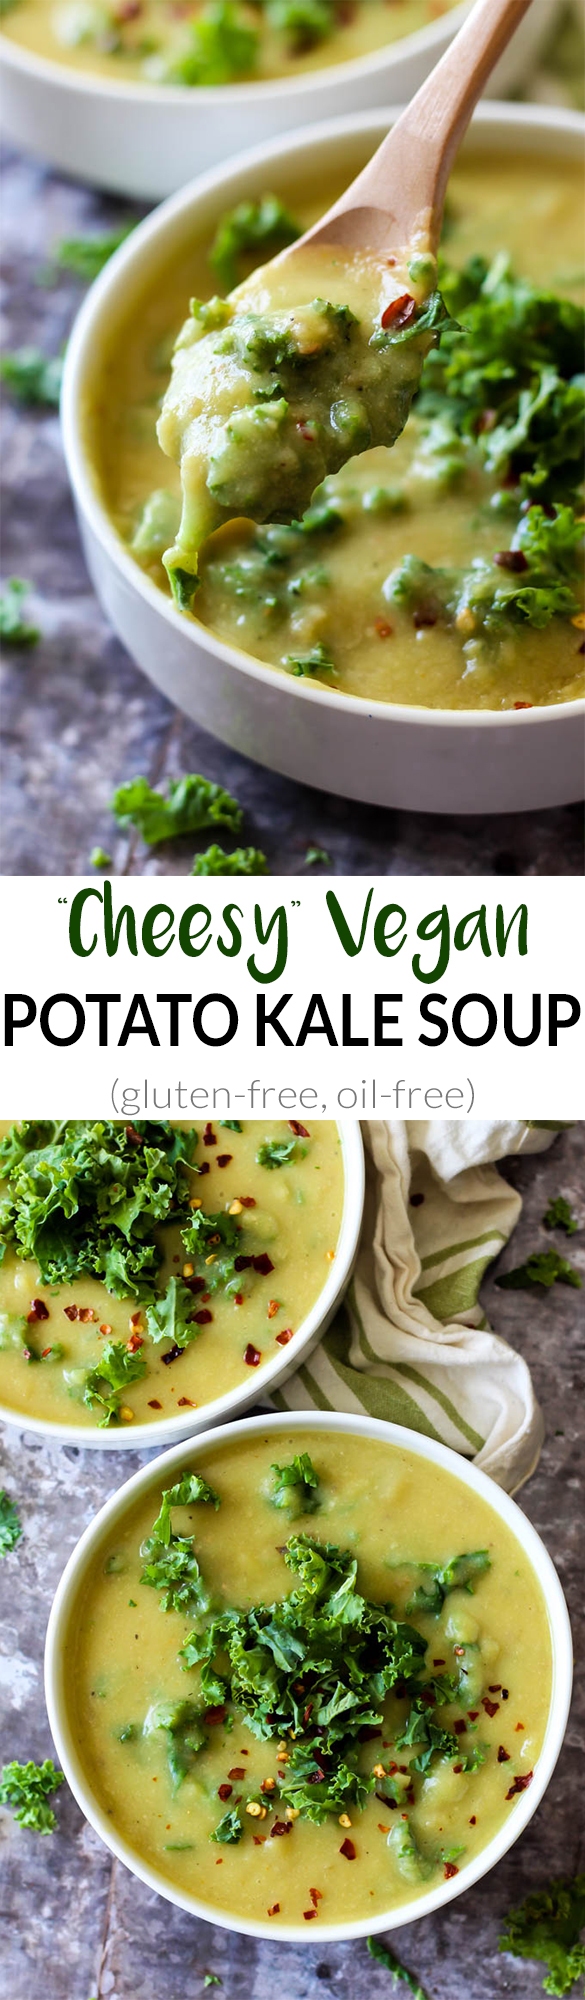 Cozy up to this Cheesy Vegan Potato Kale Soup all winter for a healthy, comforting meal! It's creamy, filling & bursting with green goodness.